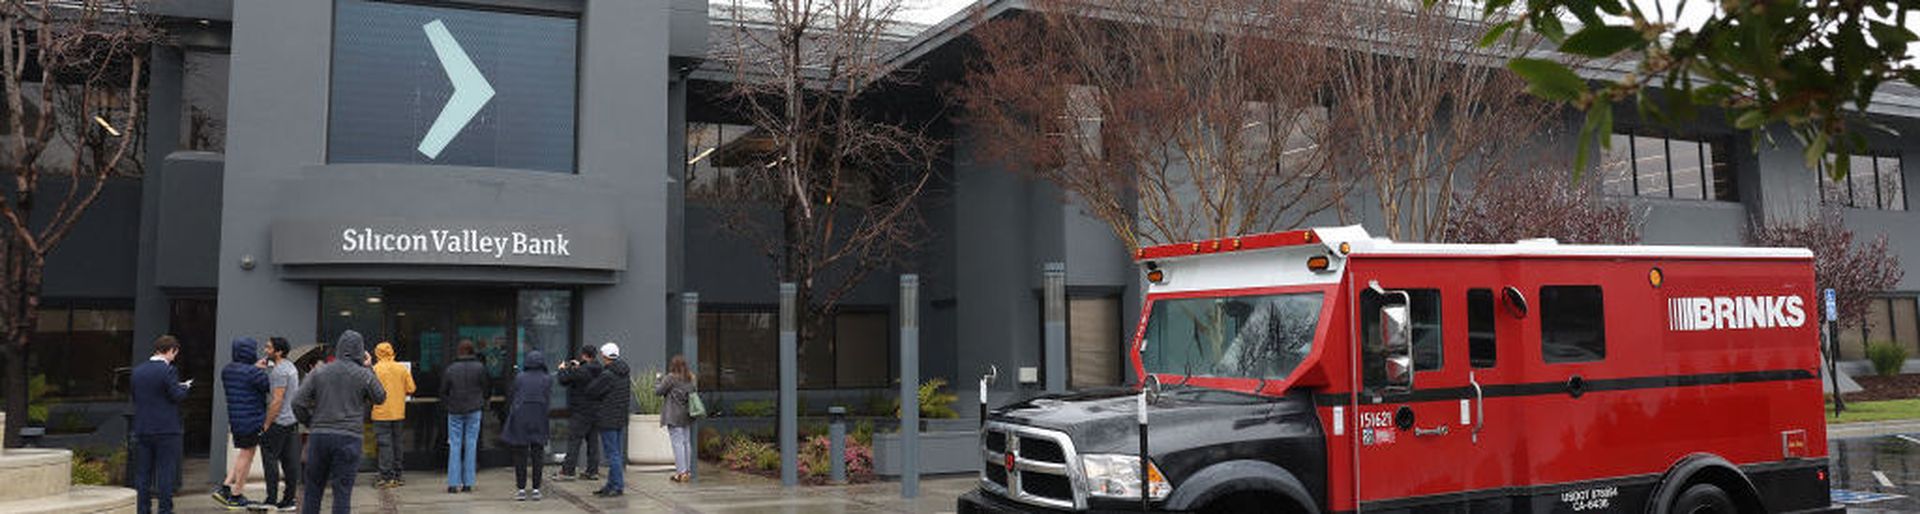 SANTA CLARA, CALIFORNIA &#8211; MARCH 10: A Brinks armored truck sits parked in front of the shuttered Silicon Valley Bank (SVB) headquarters on March 10, 2023 in Santa Clara, California. Silicon Valley Bank was shut down on Friday morning by California regulators and was put in control of the U.S. Federal Deposit Insurance Corporation. Prior to be...